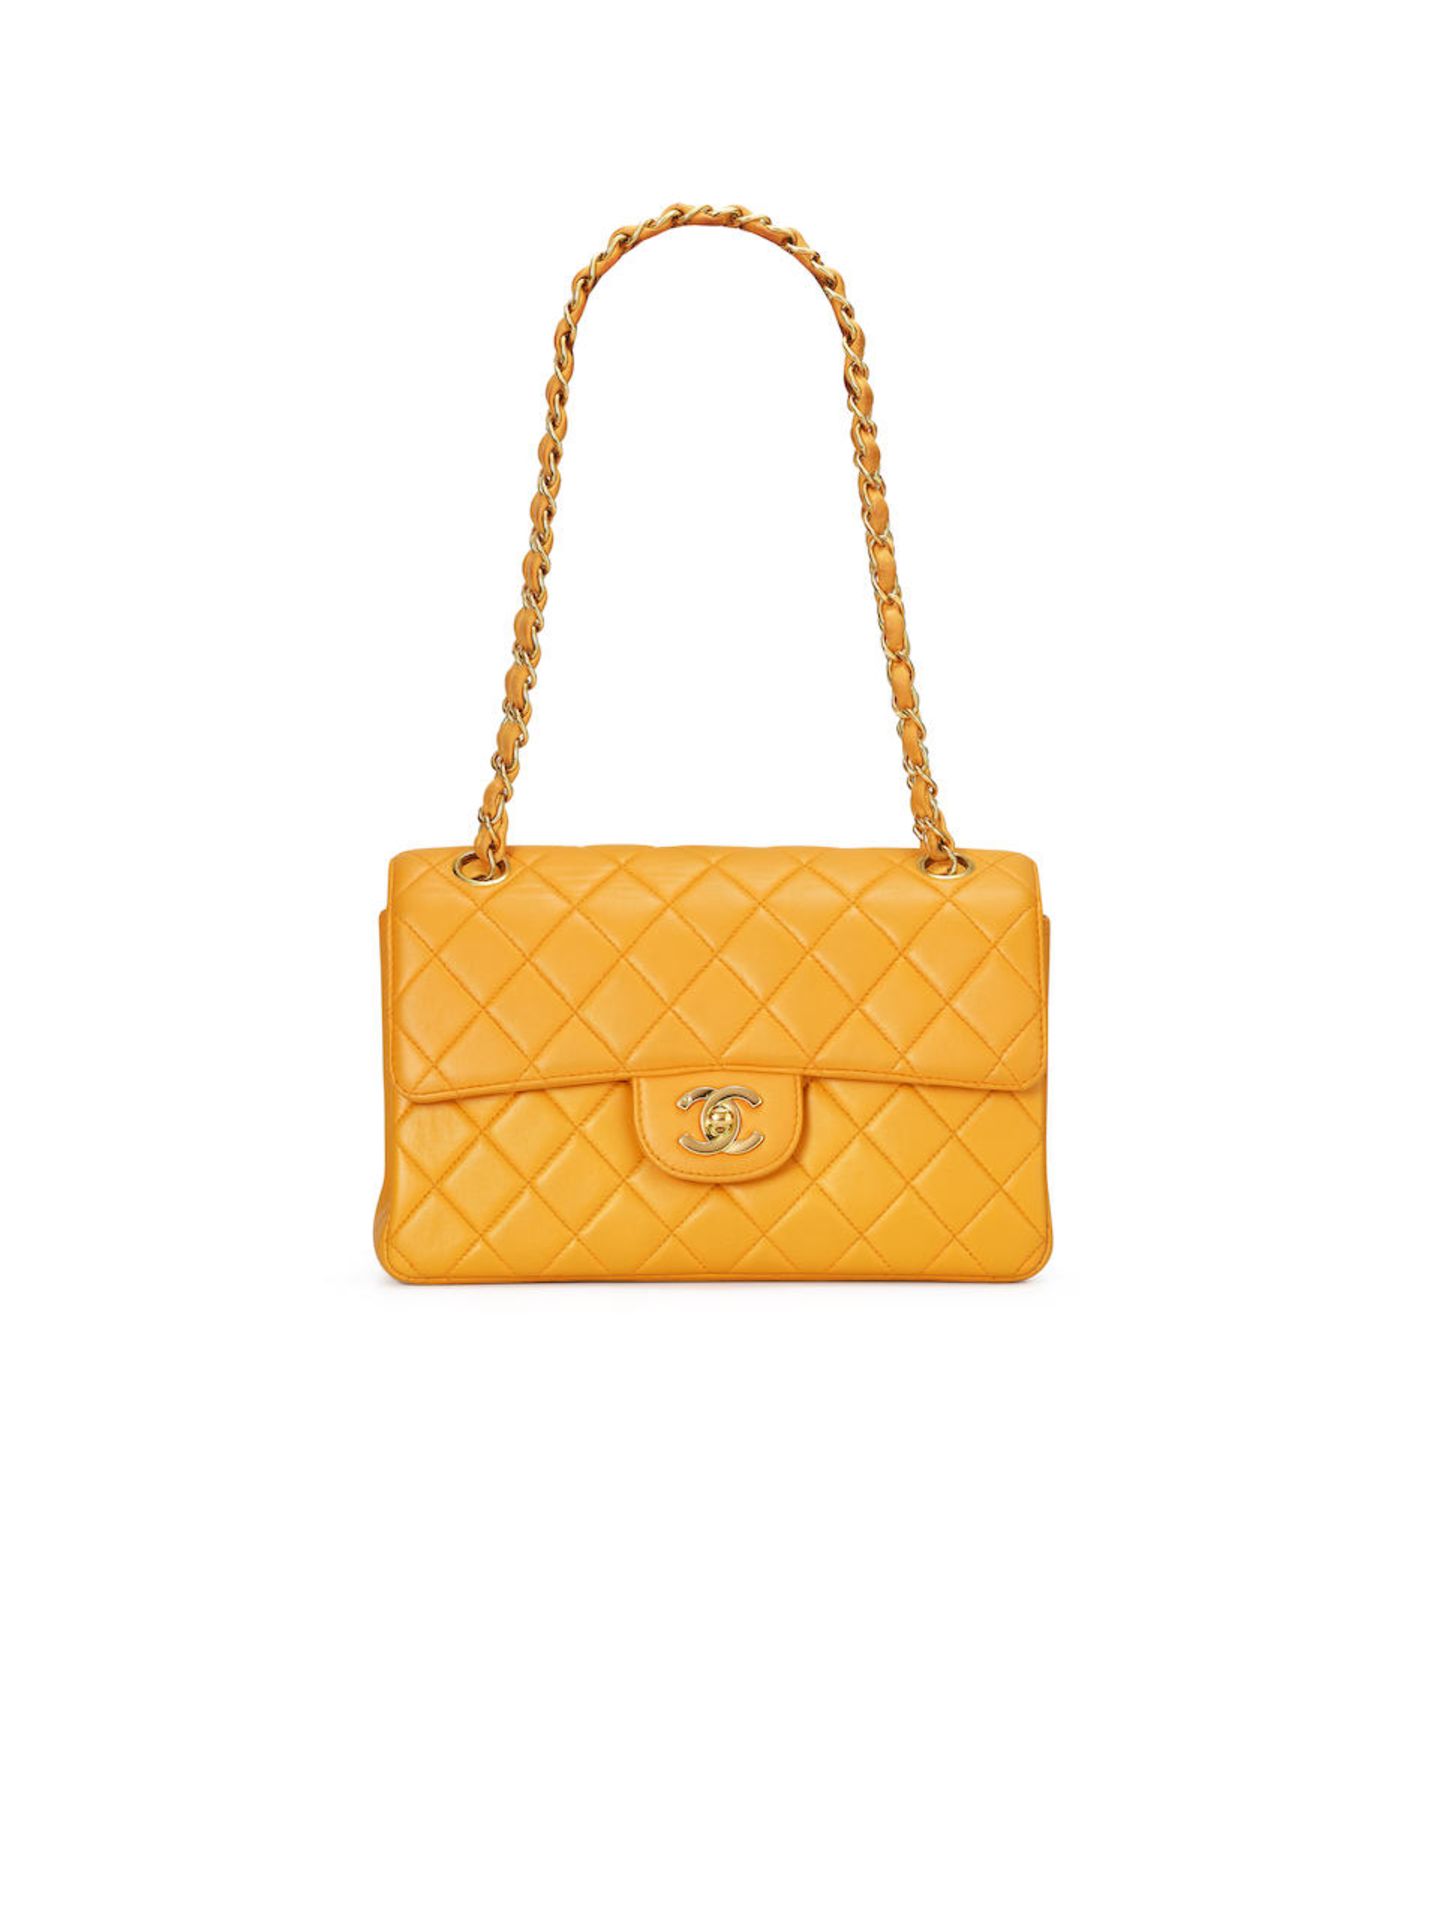 CHANEL: YELLOW DOUBLE SIDED LAMBSKIN FLAP BAG WITH GOLD TONED HARDWARE (Includes serial sticker,...